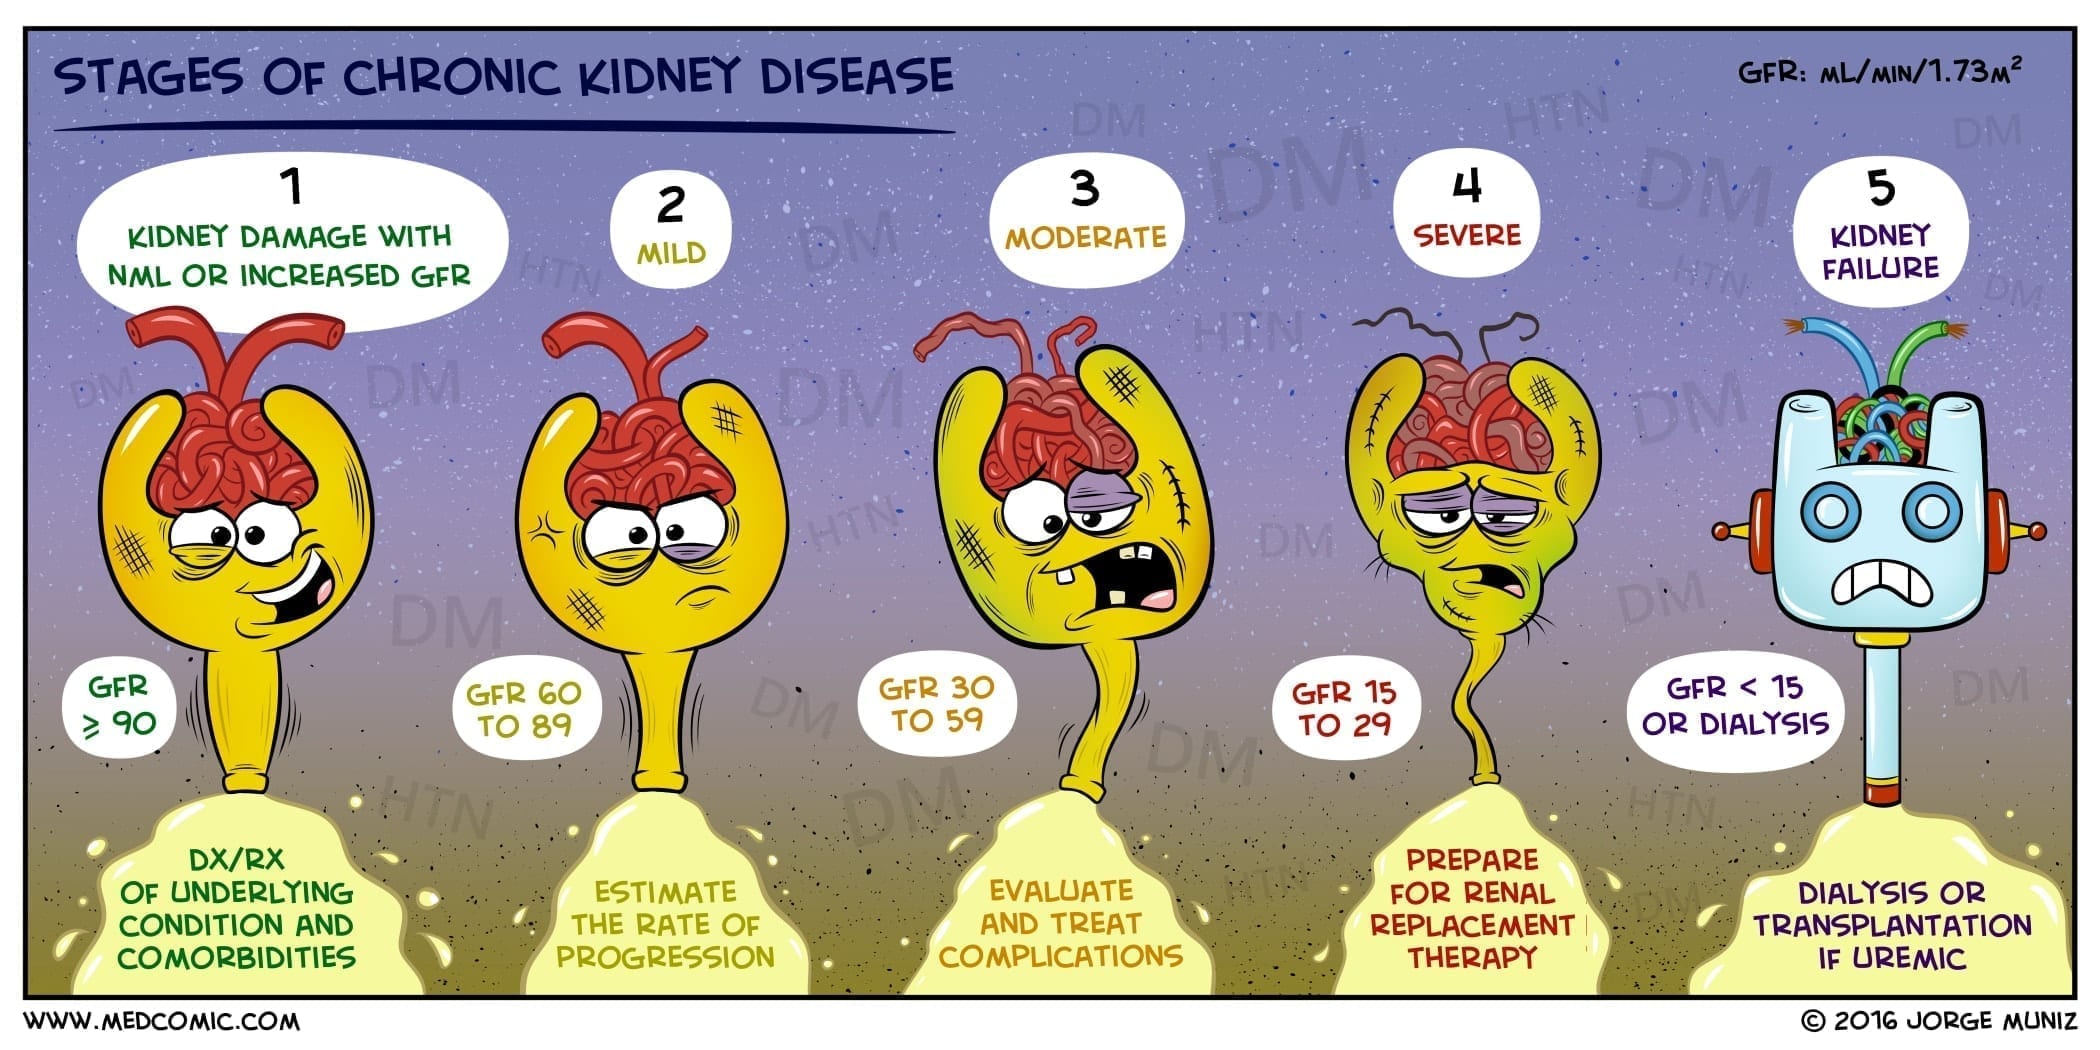 Life Insurance With Kidney Disease | LION.ie